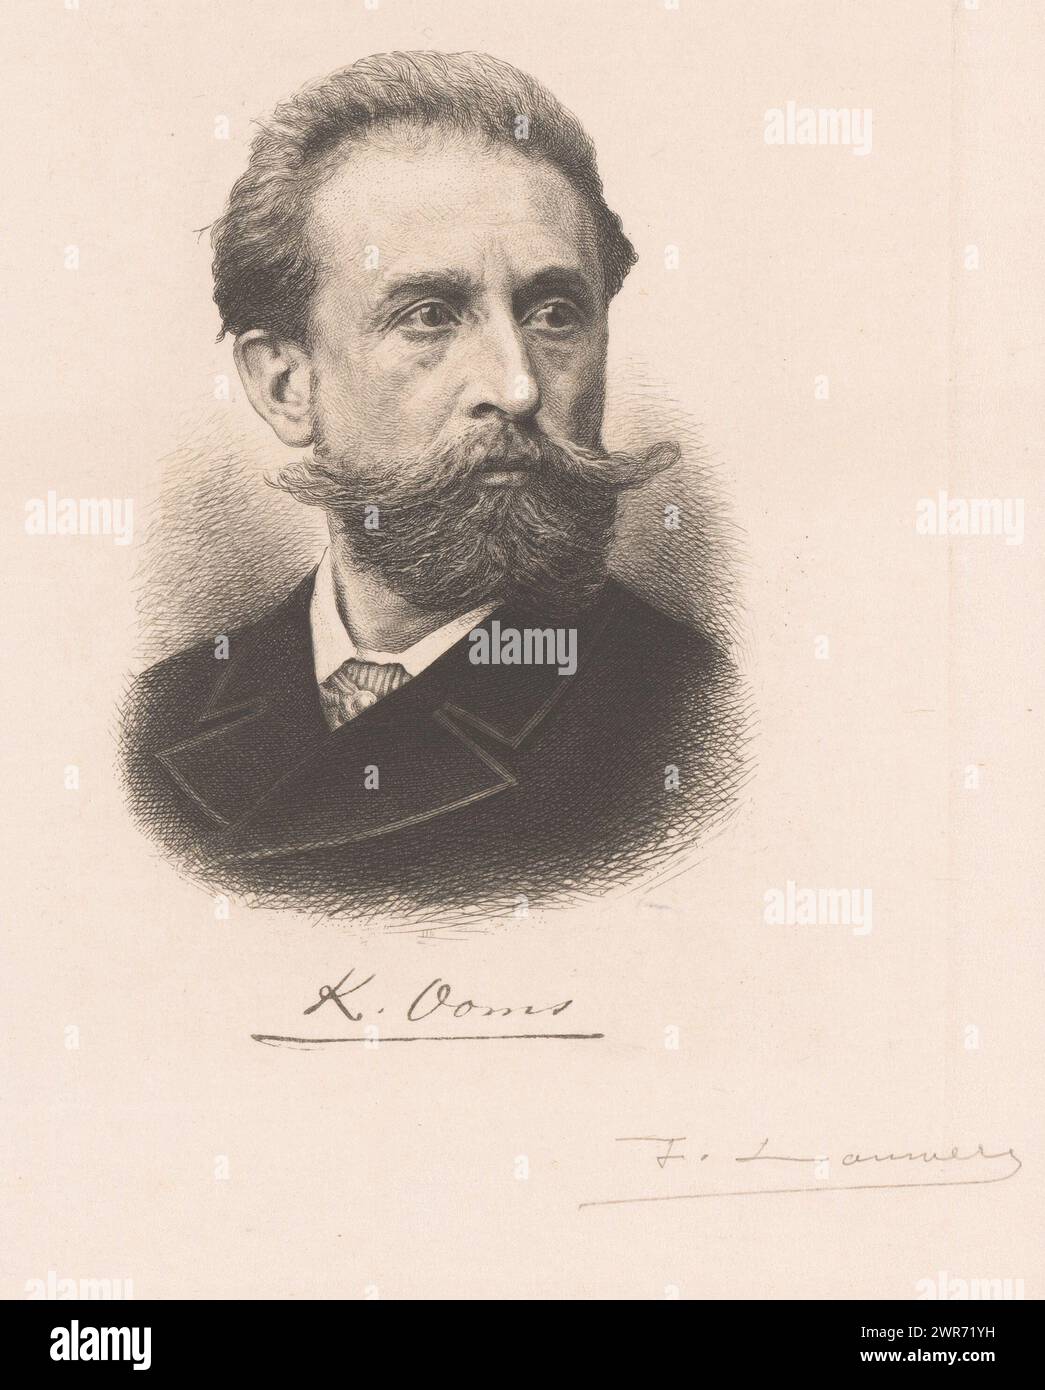 Portrait of Karel Ooms, K. Ooms (title on object), print maker: Frans Lauwers, (signed by artist), 1864 - 1889, paper, etching, drypoint, height 242 mm × width 178 mm, print Stock Photo